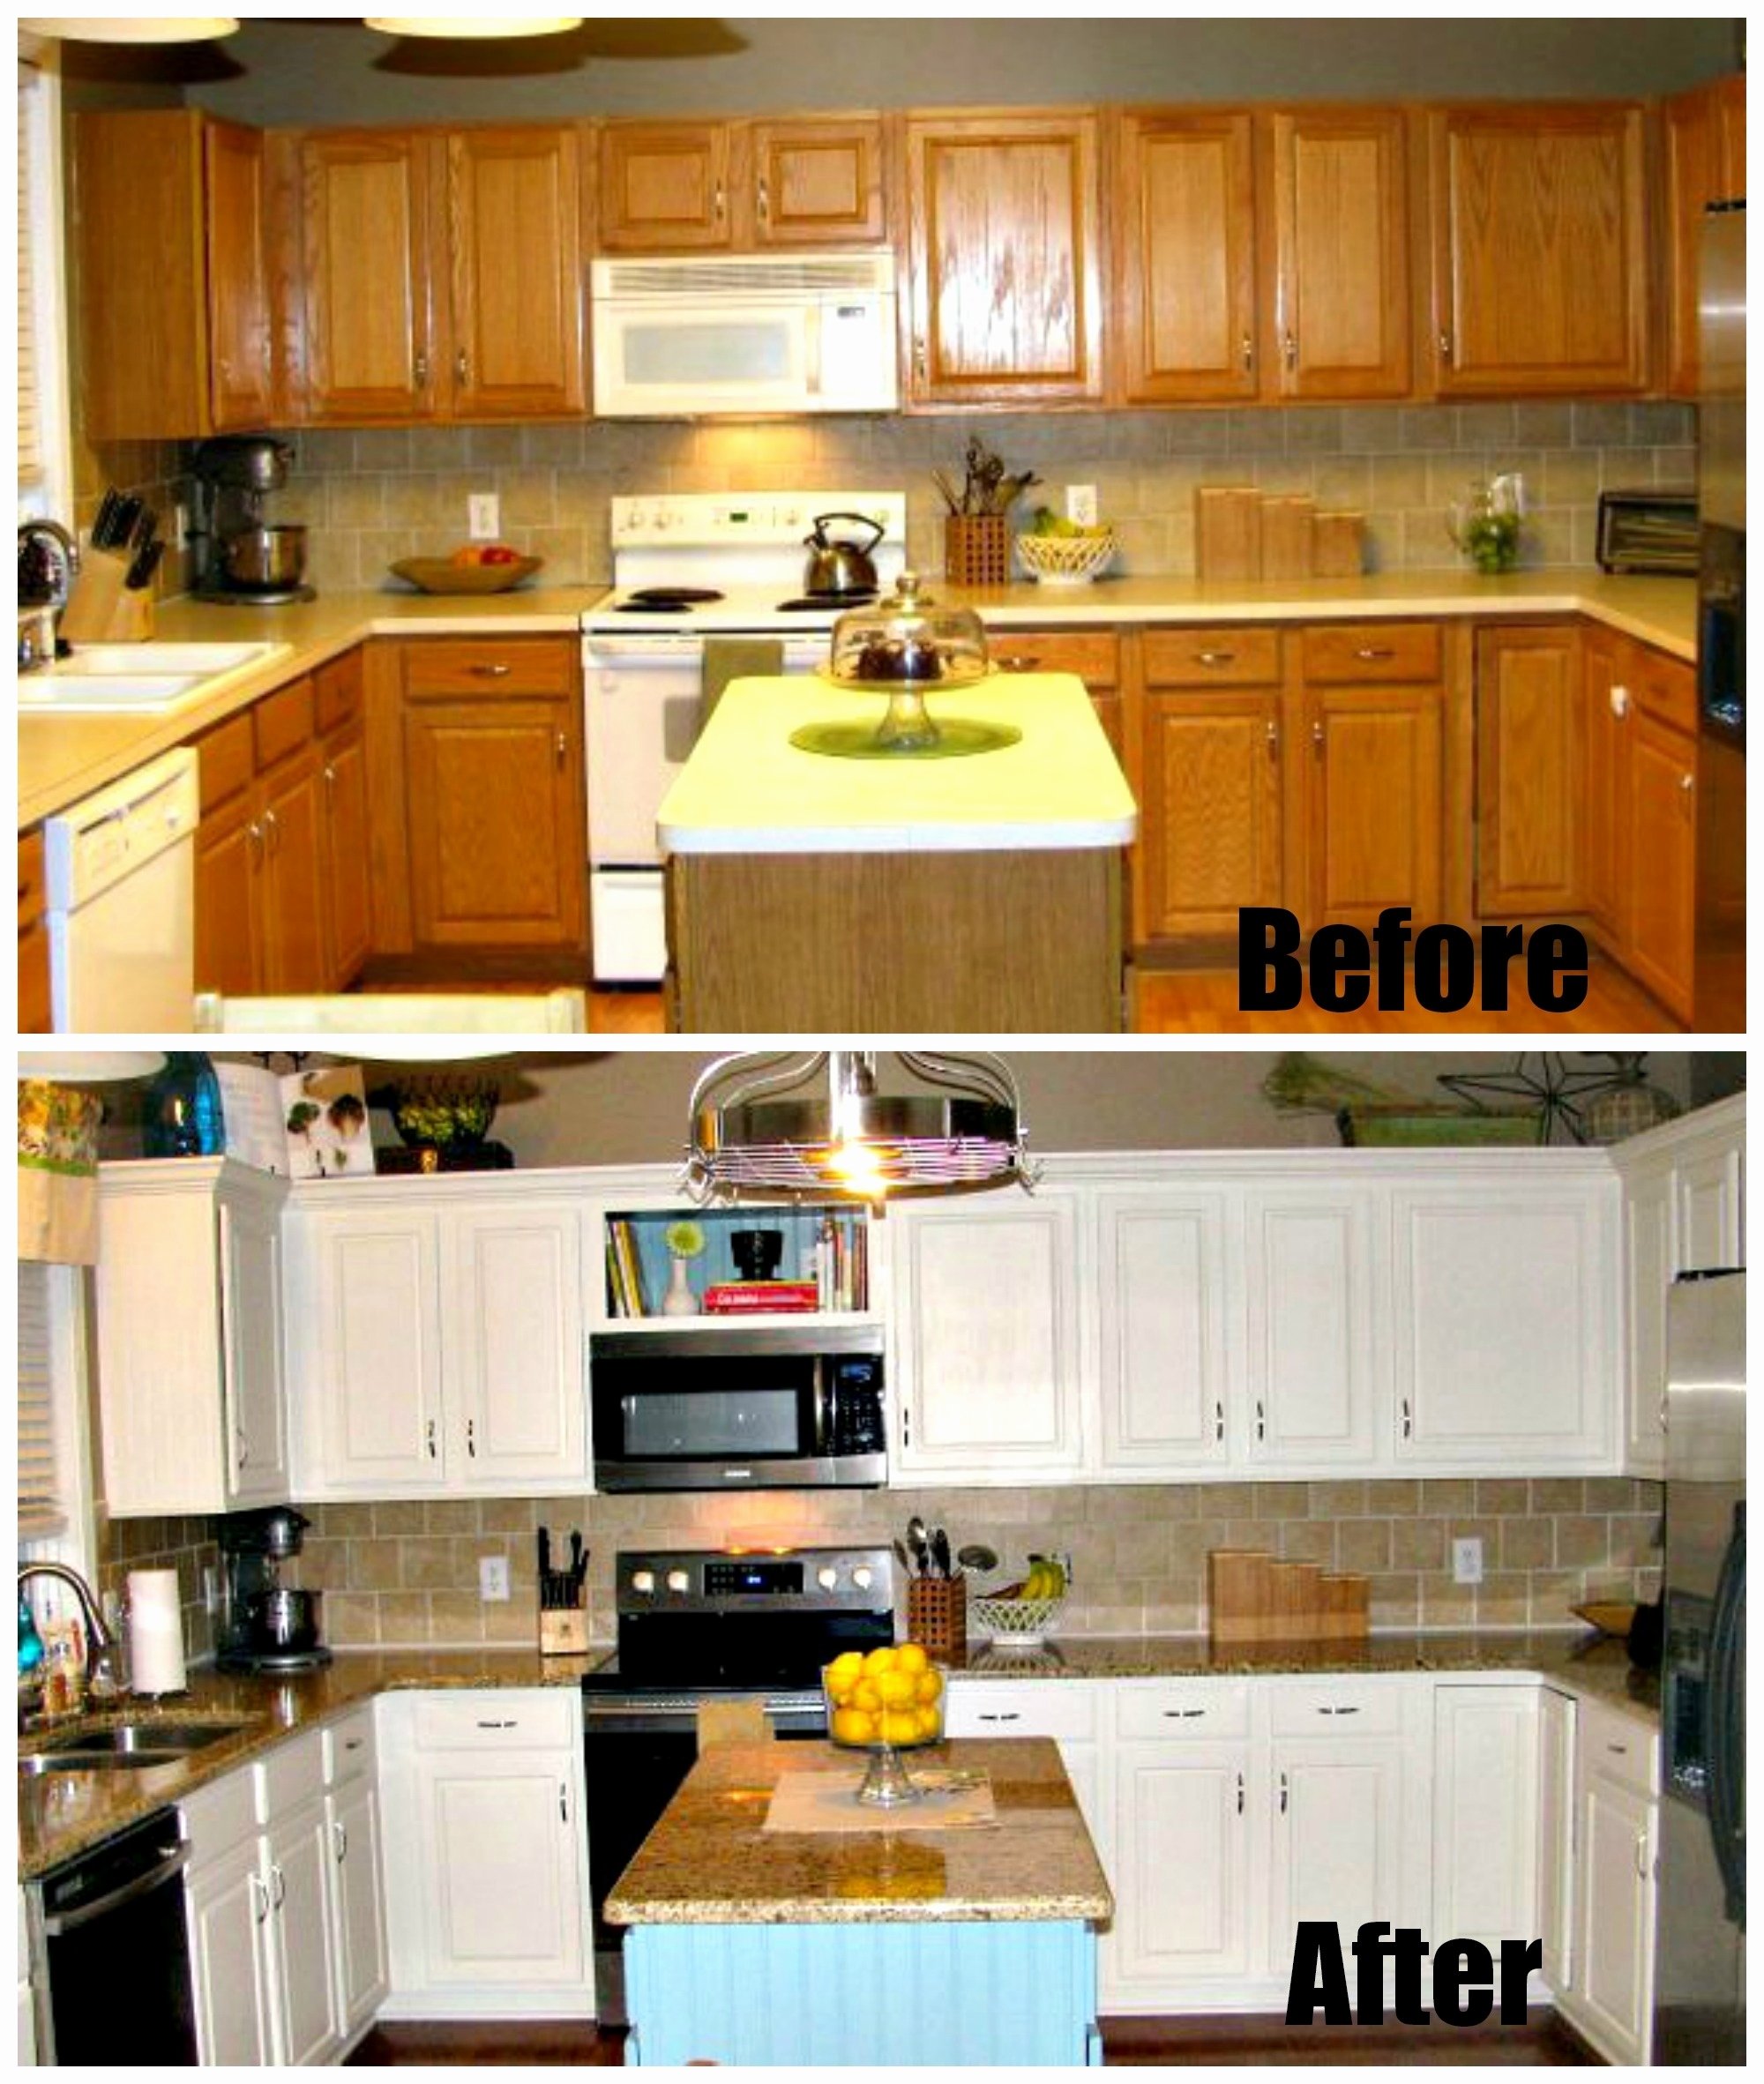 10 Lovely Kitchen Remodeling Ideas On A Small Budget 2022